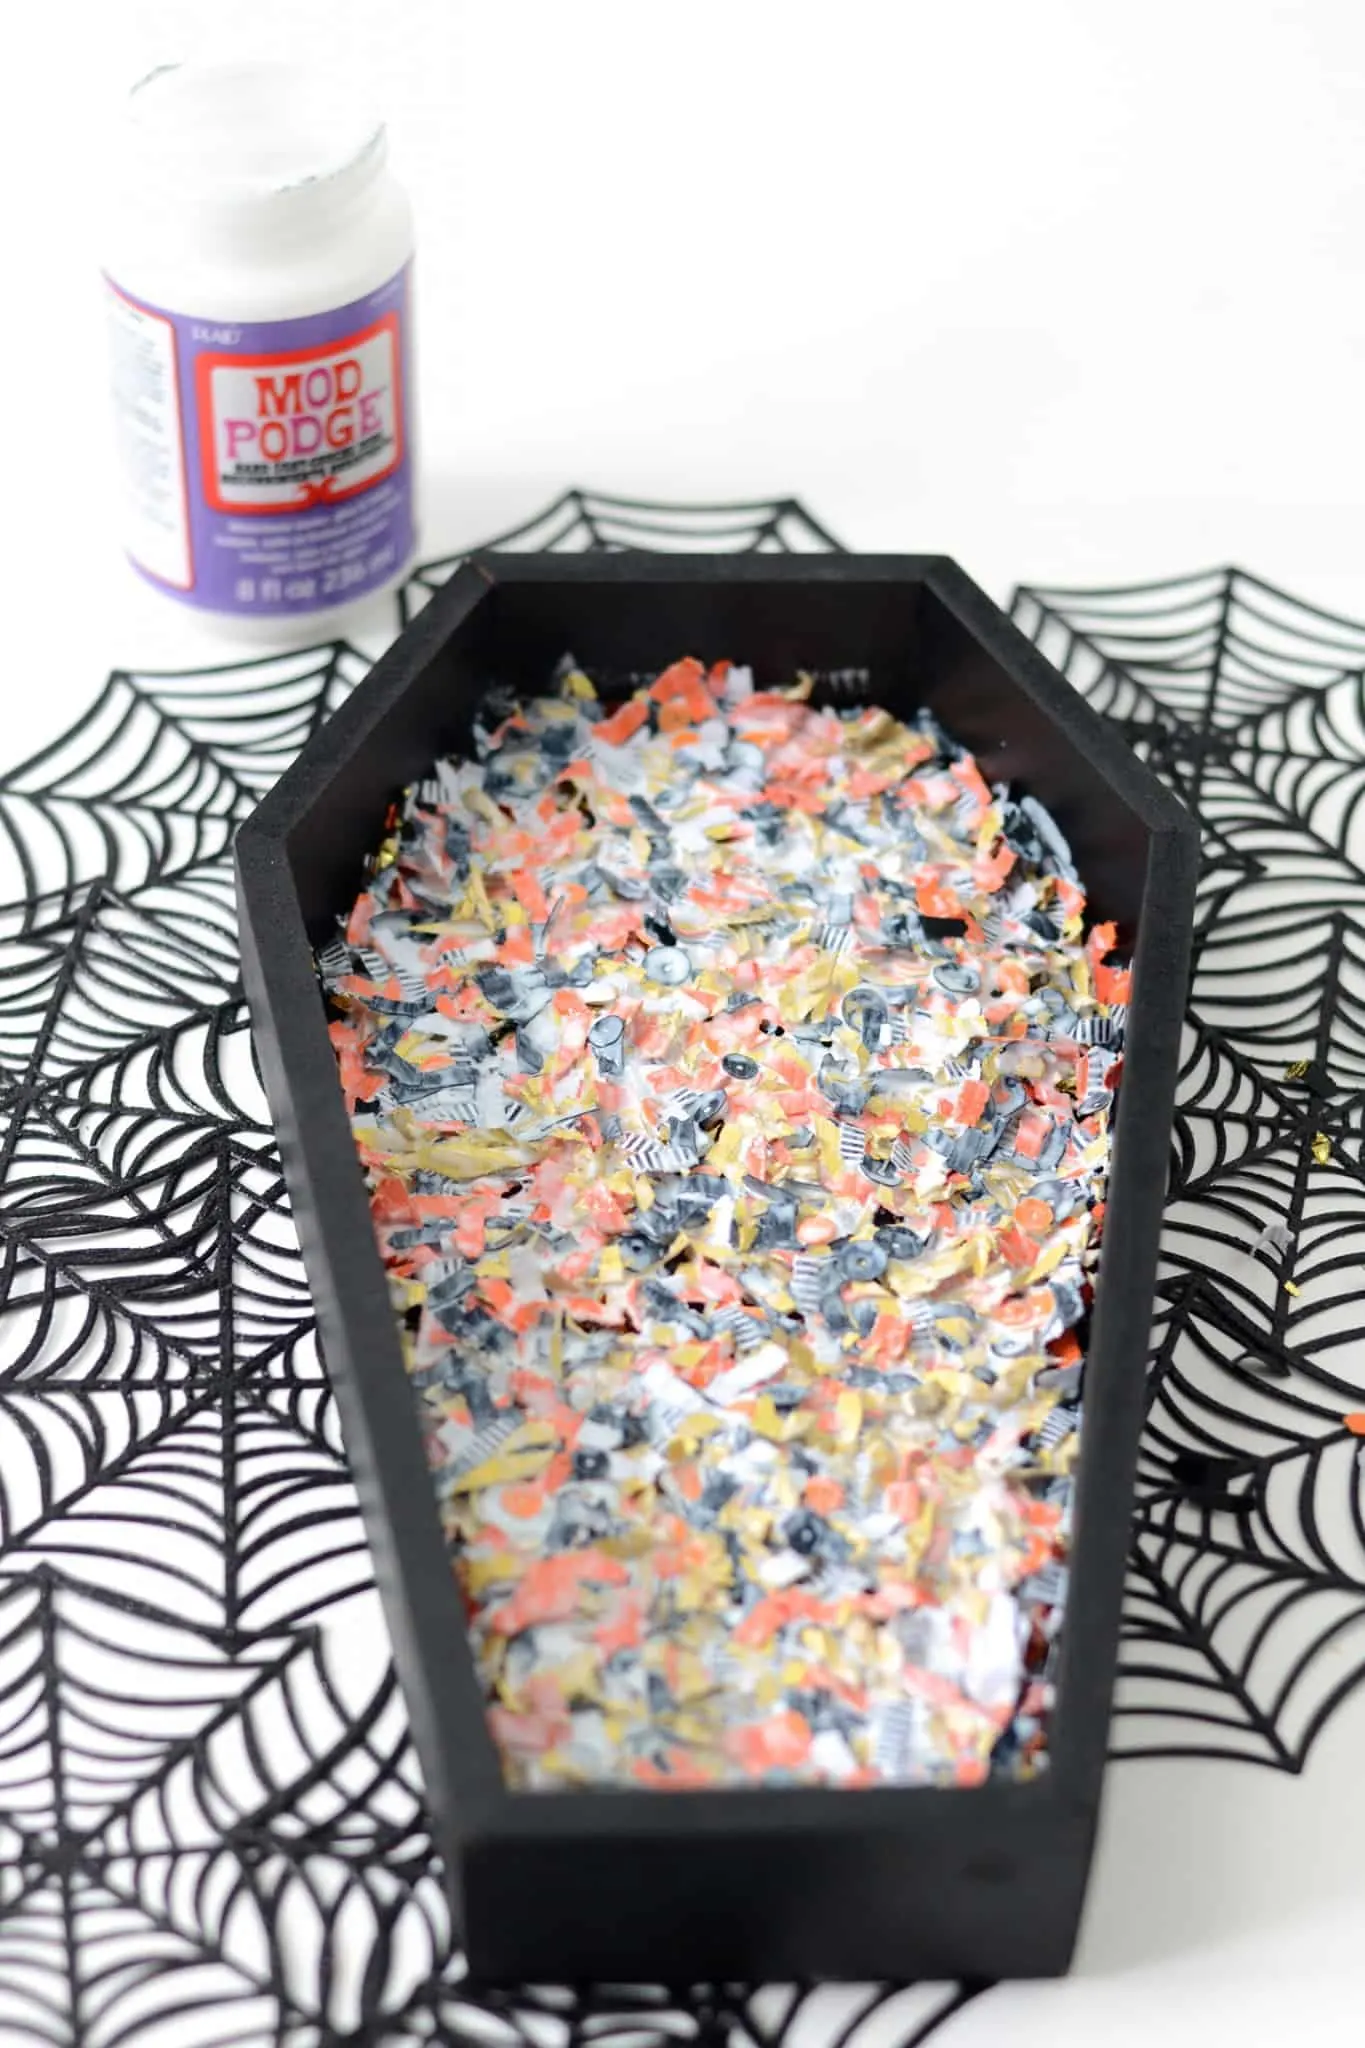 Wet Halloween confetti drying inside a wood tray